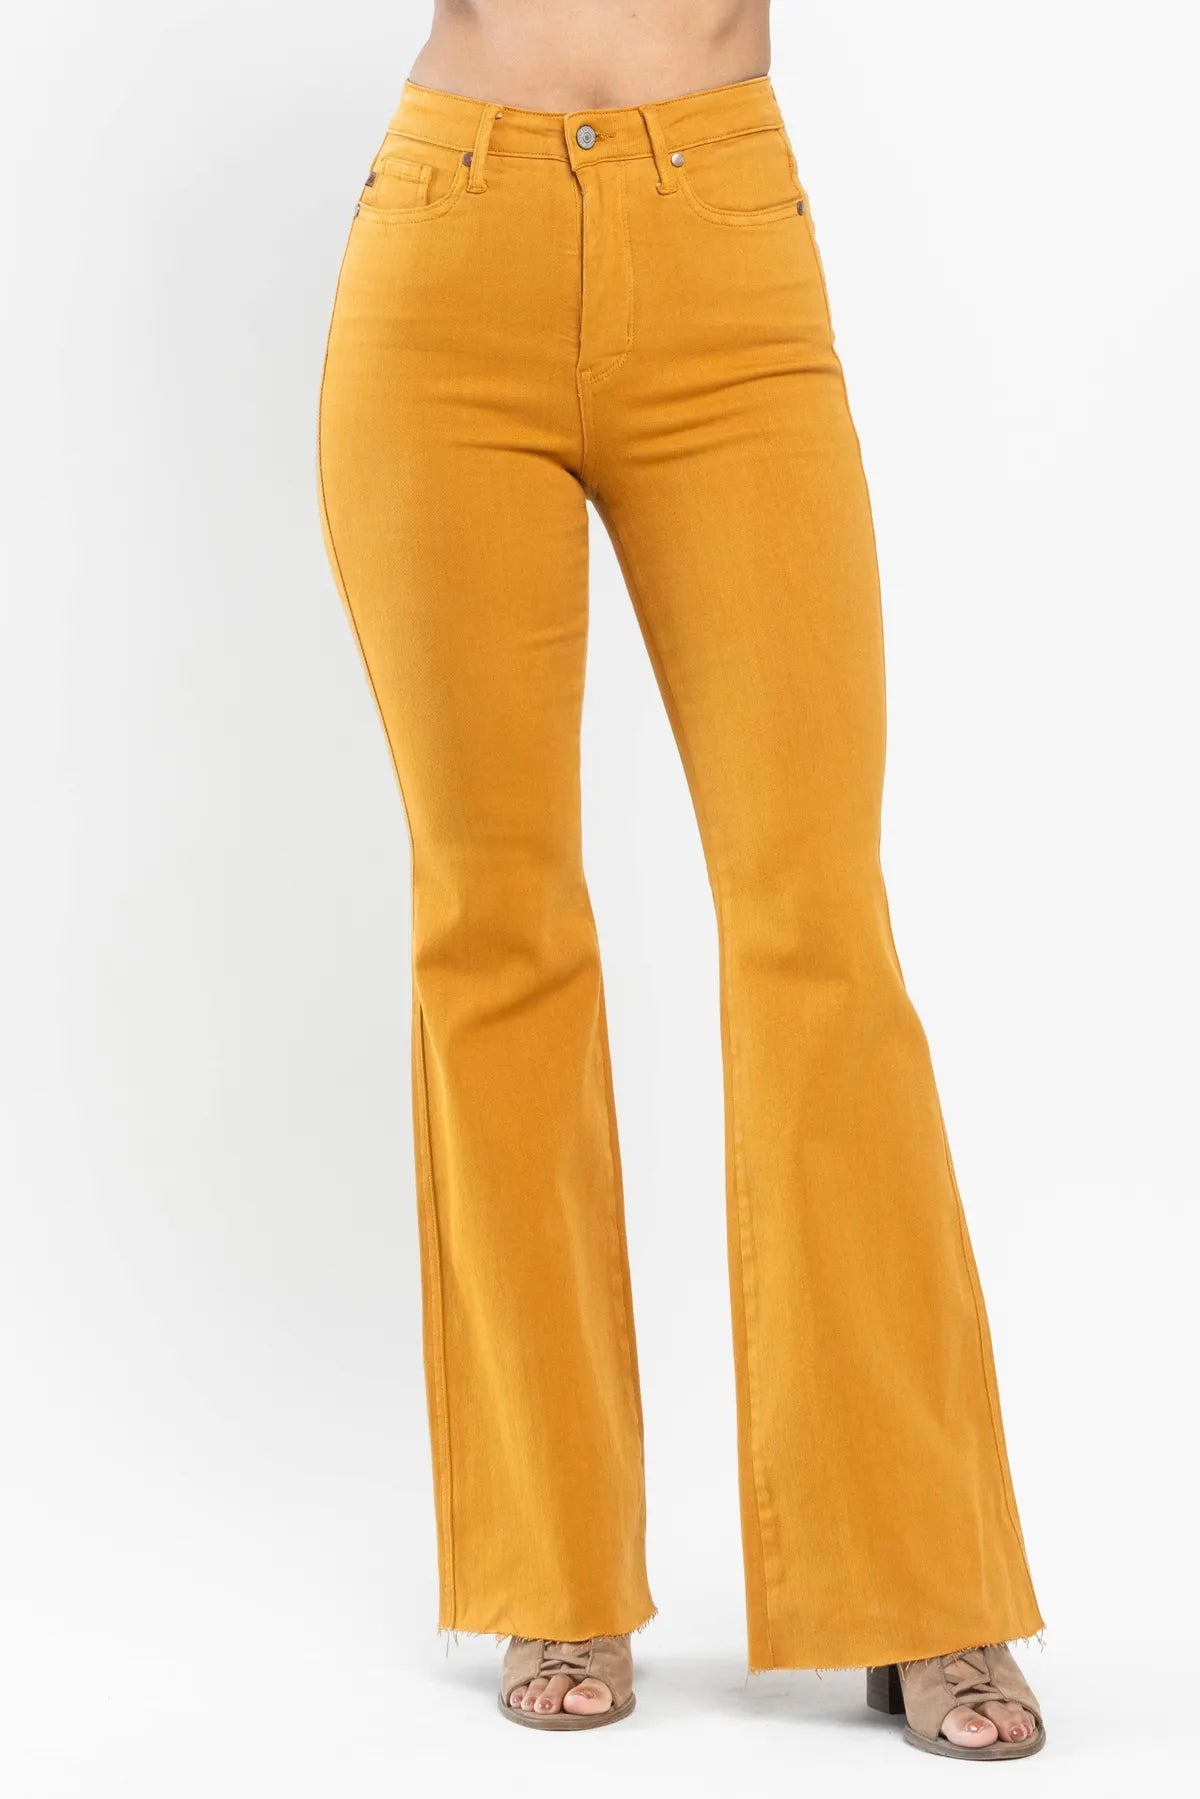 Judy Blue High Rise Tummy Control Top Flare Marigold Denim 88713 - Exclusive-Jeans-Sunshine and Wine Boutique